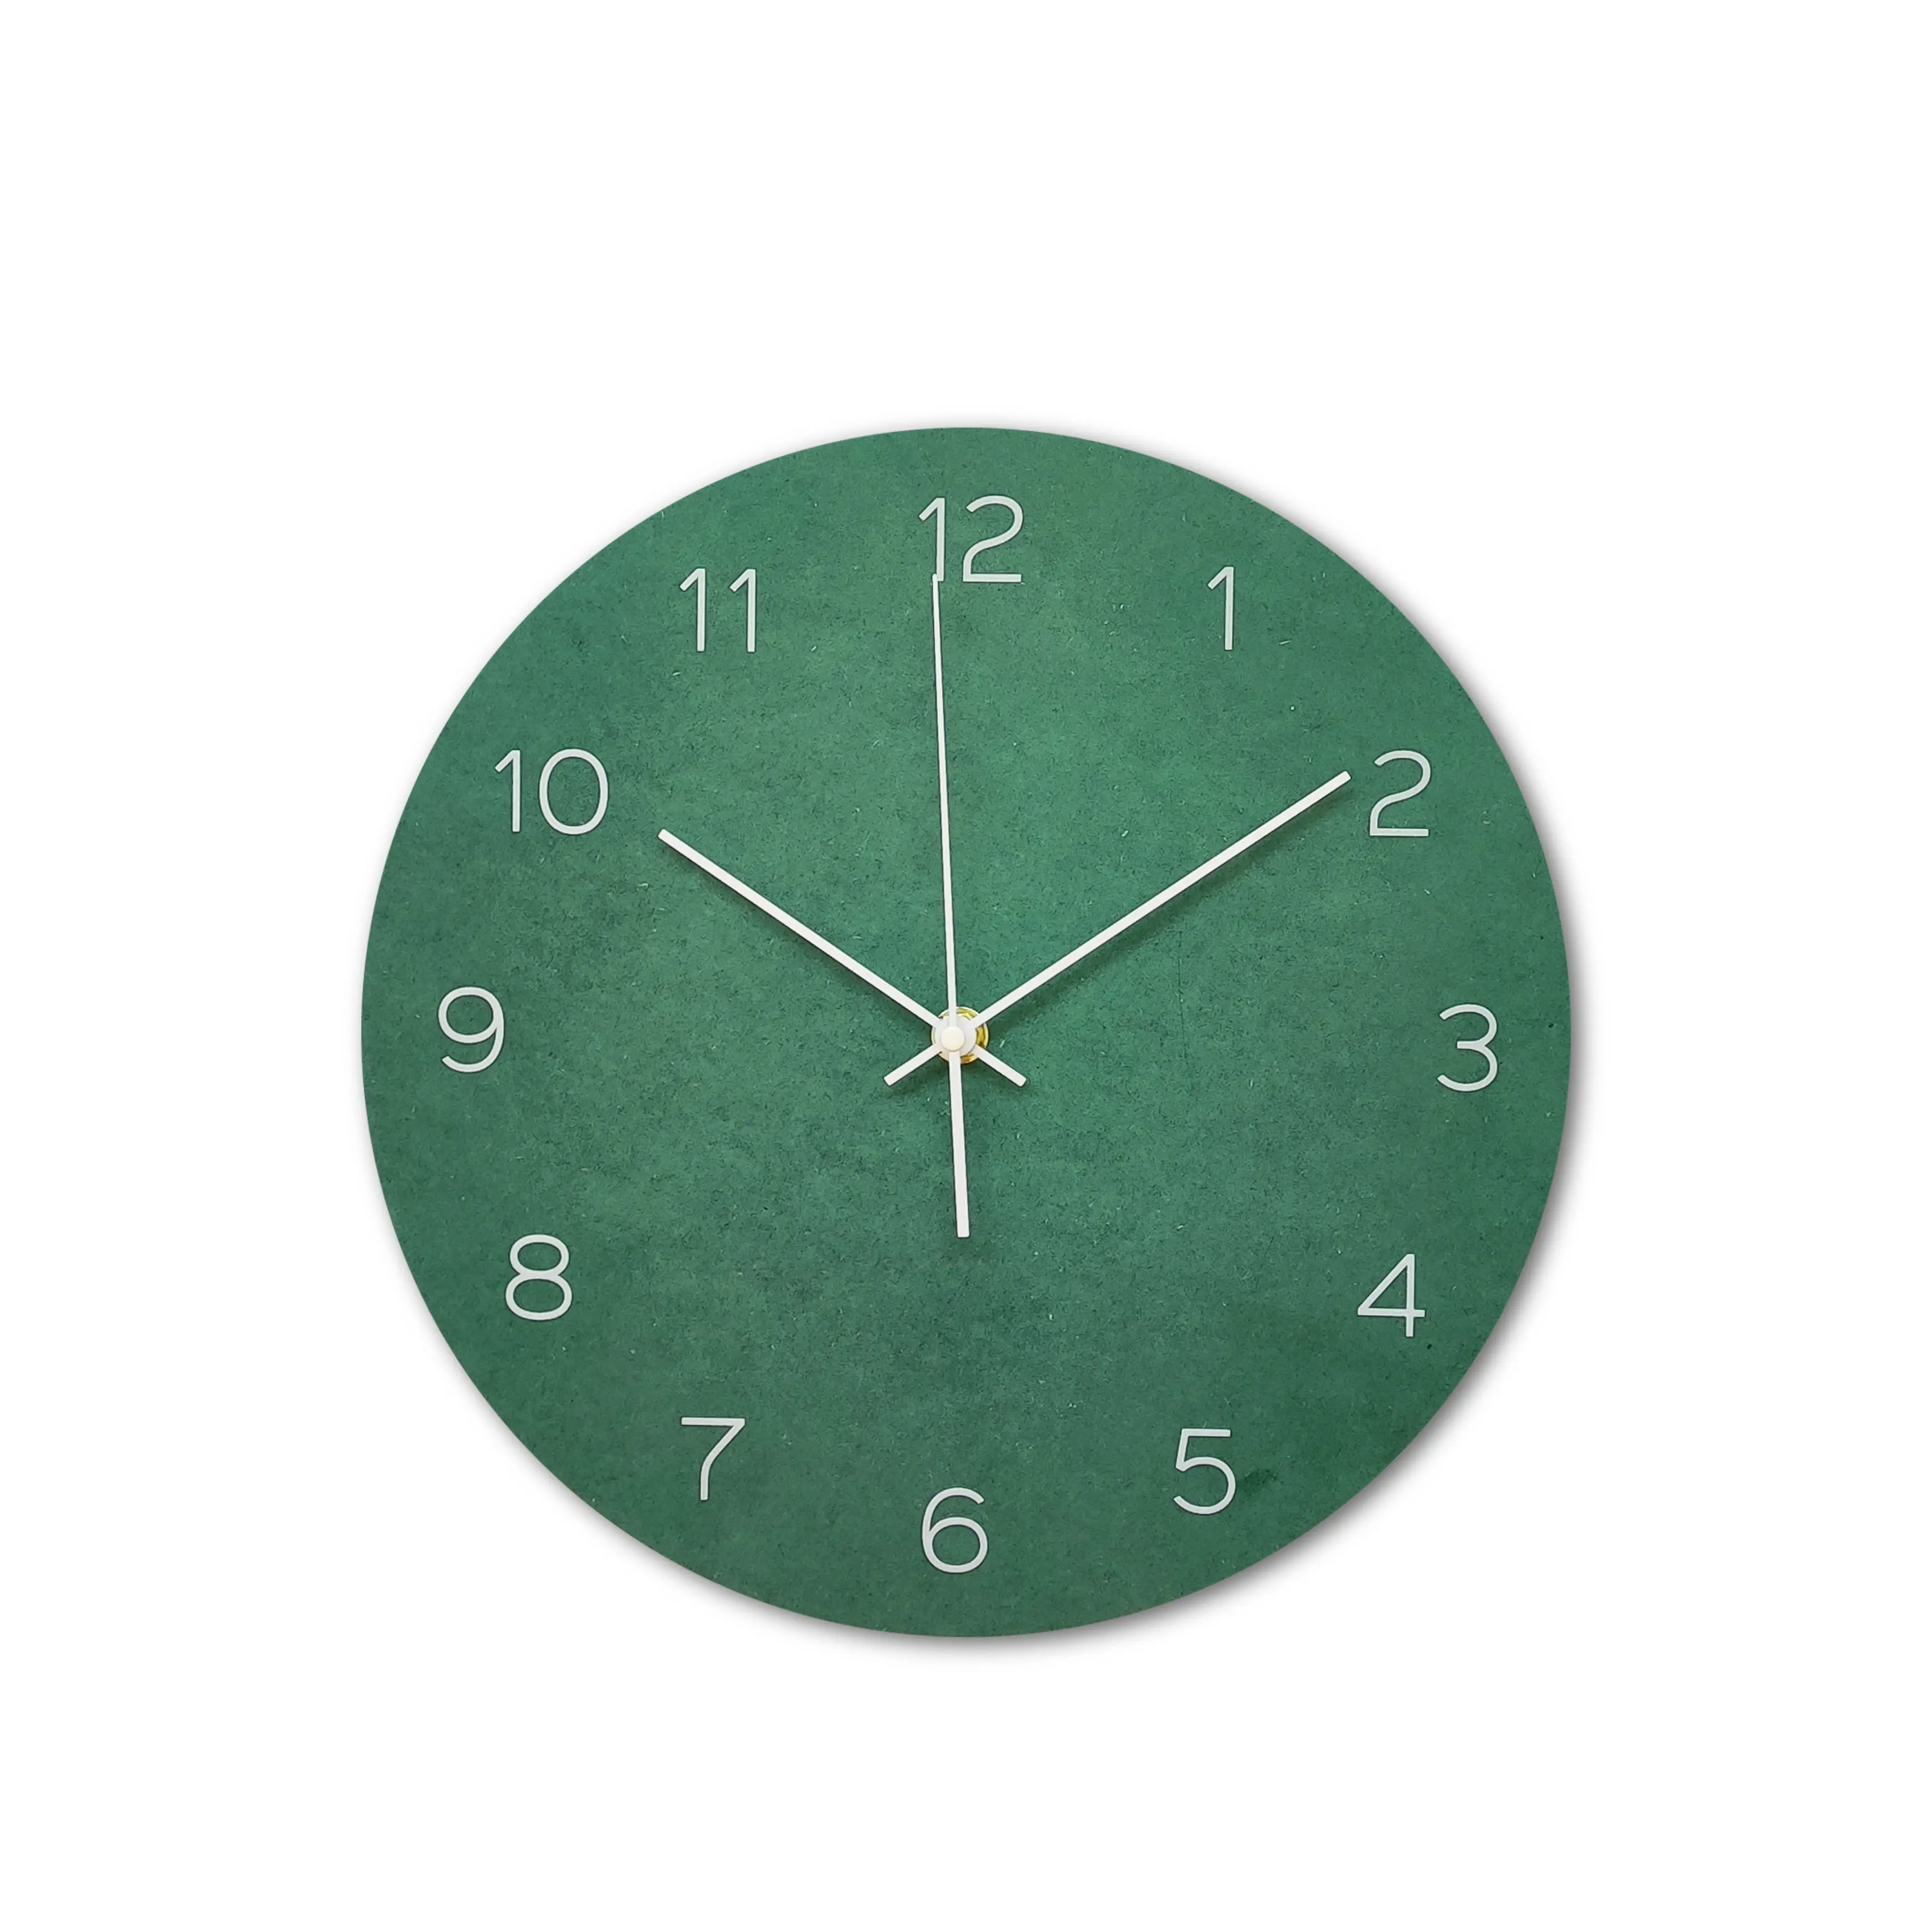 12 inch Minimalist-style MDF Wood Wall Clock Whole Clock From Inside to Outside Green Color